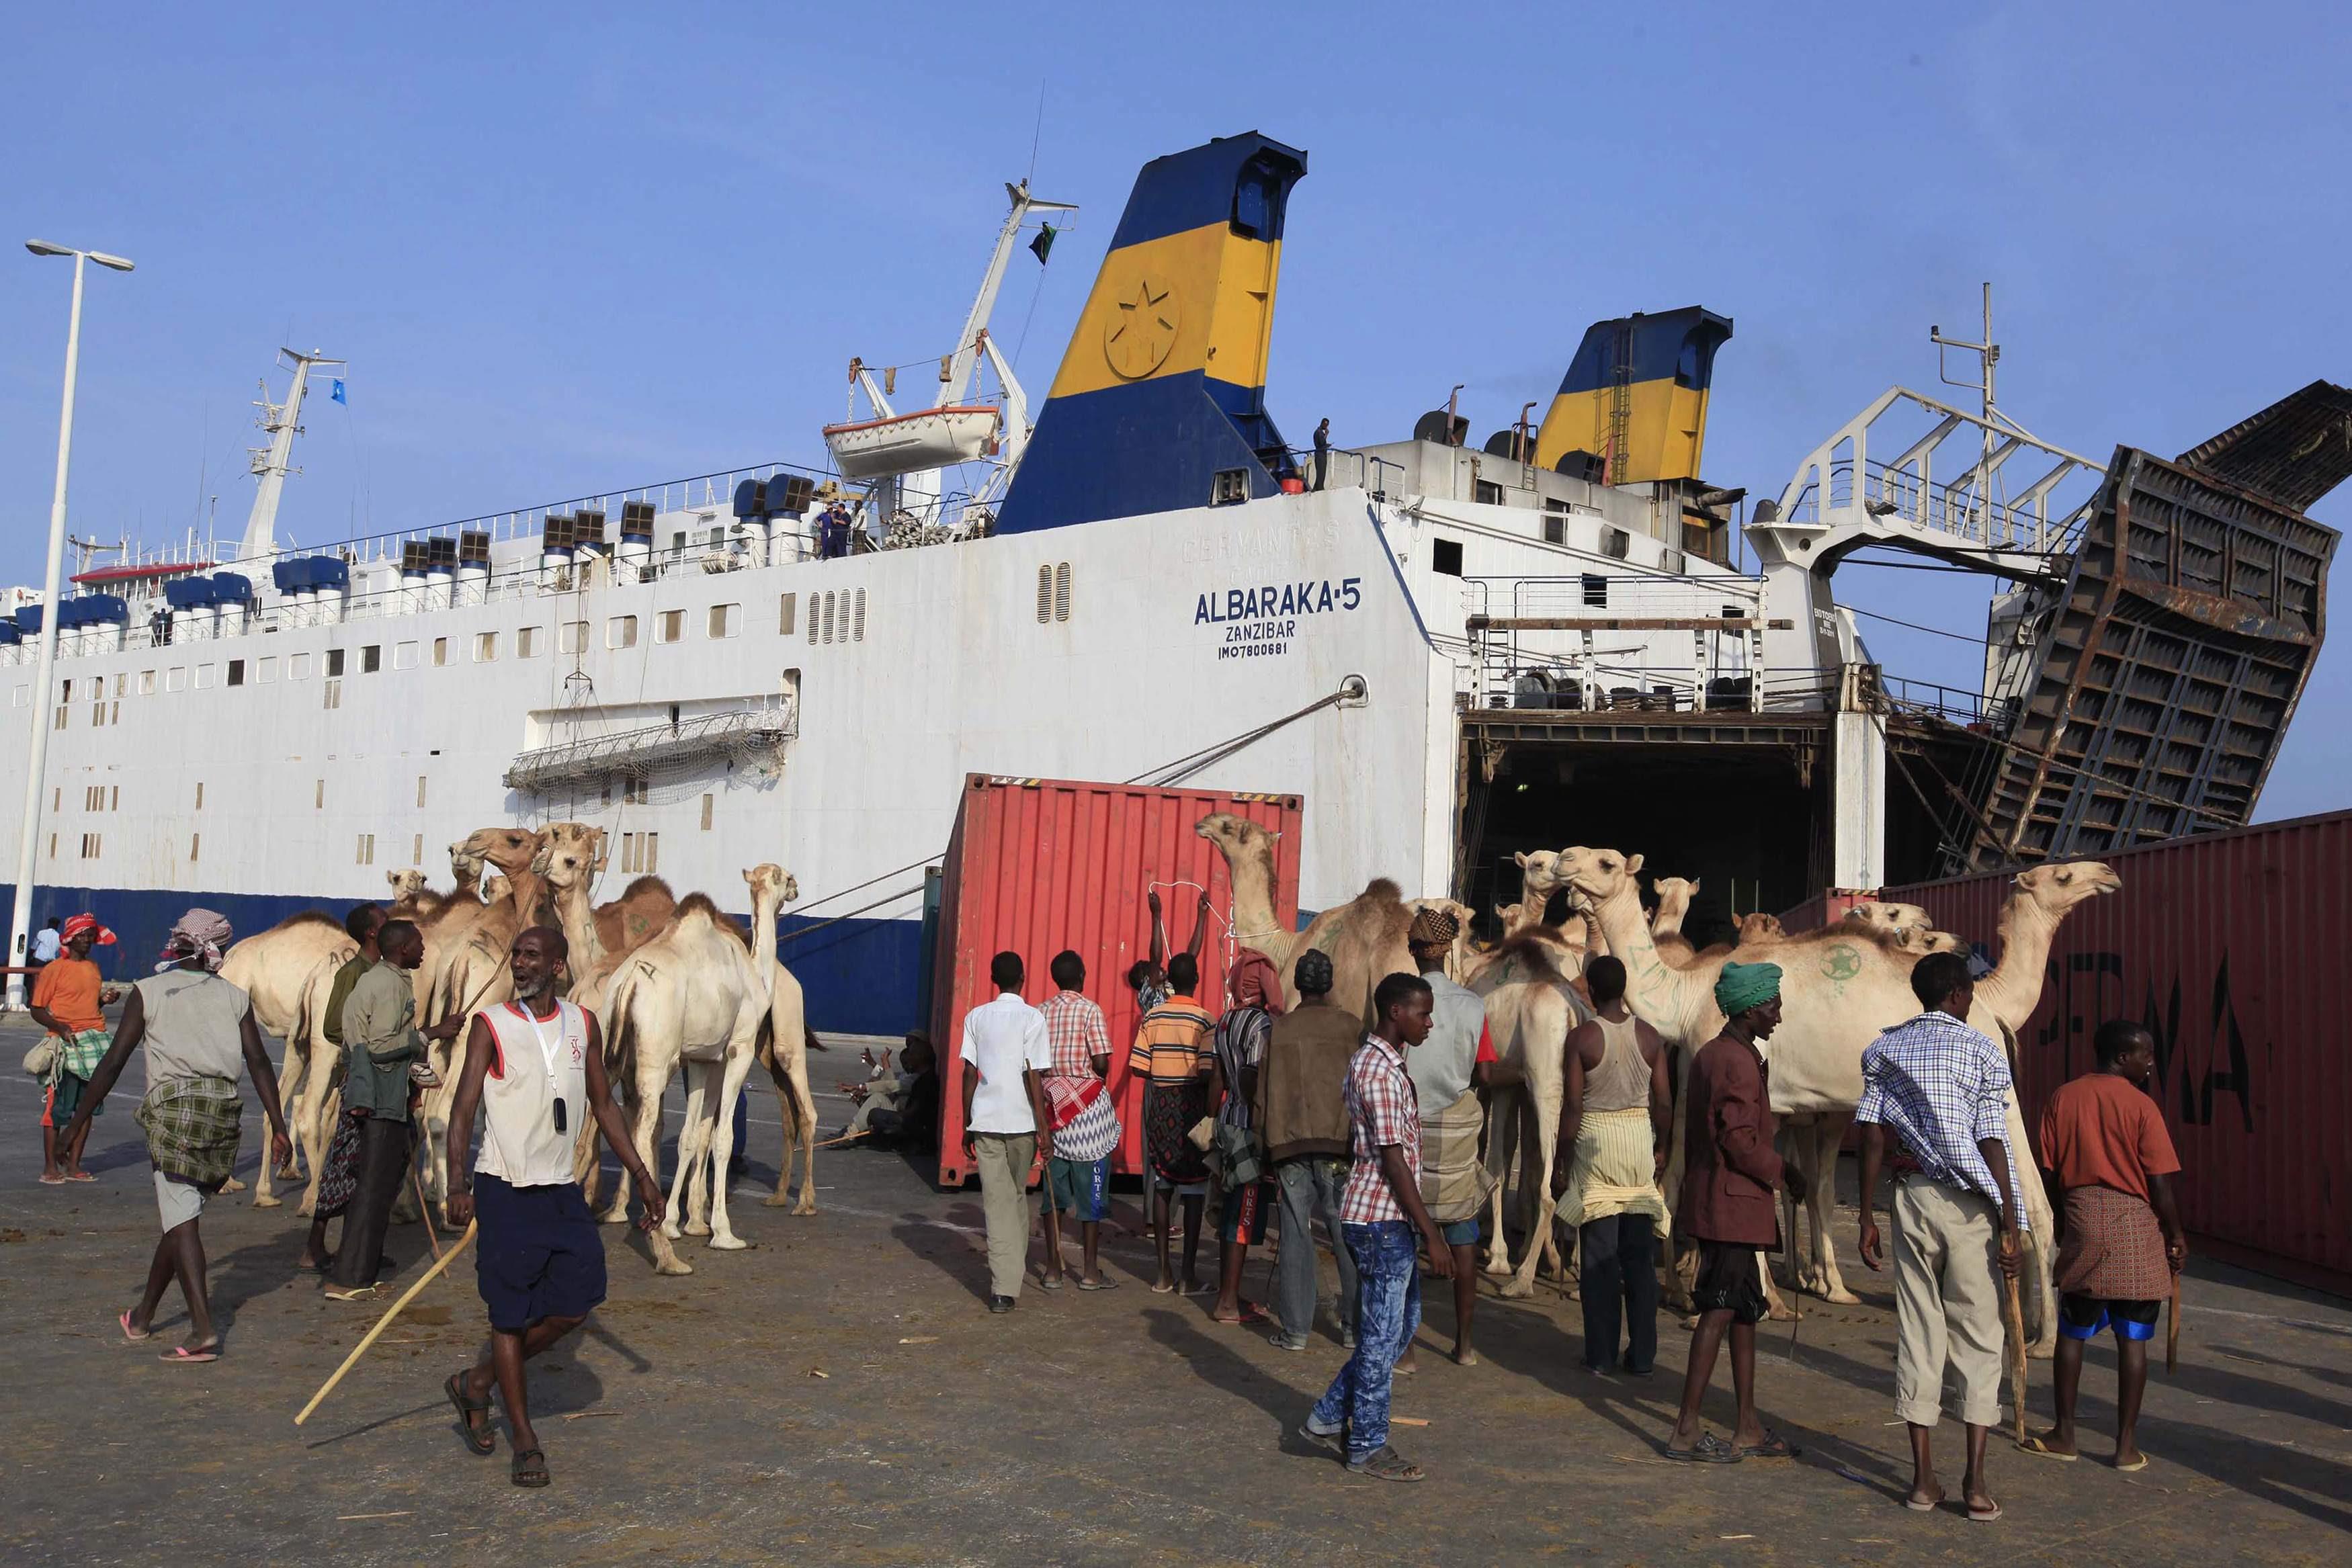 Camels, which are being exported, are seen at the port in Mogadishu August 3, 2013. Street lamps now